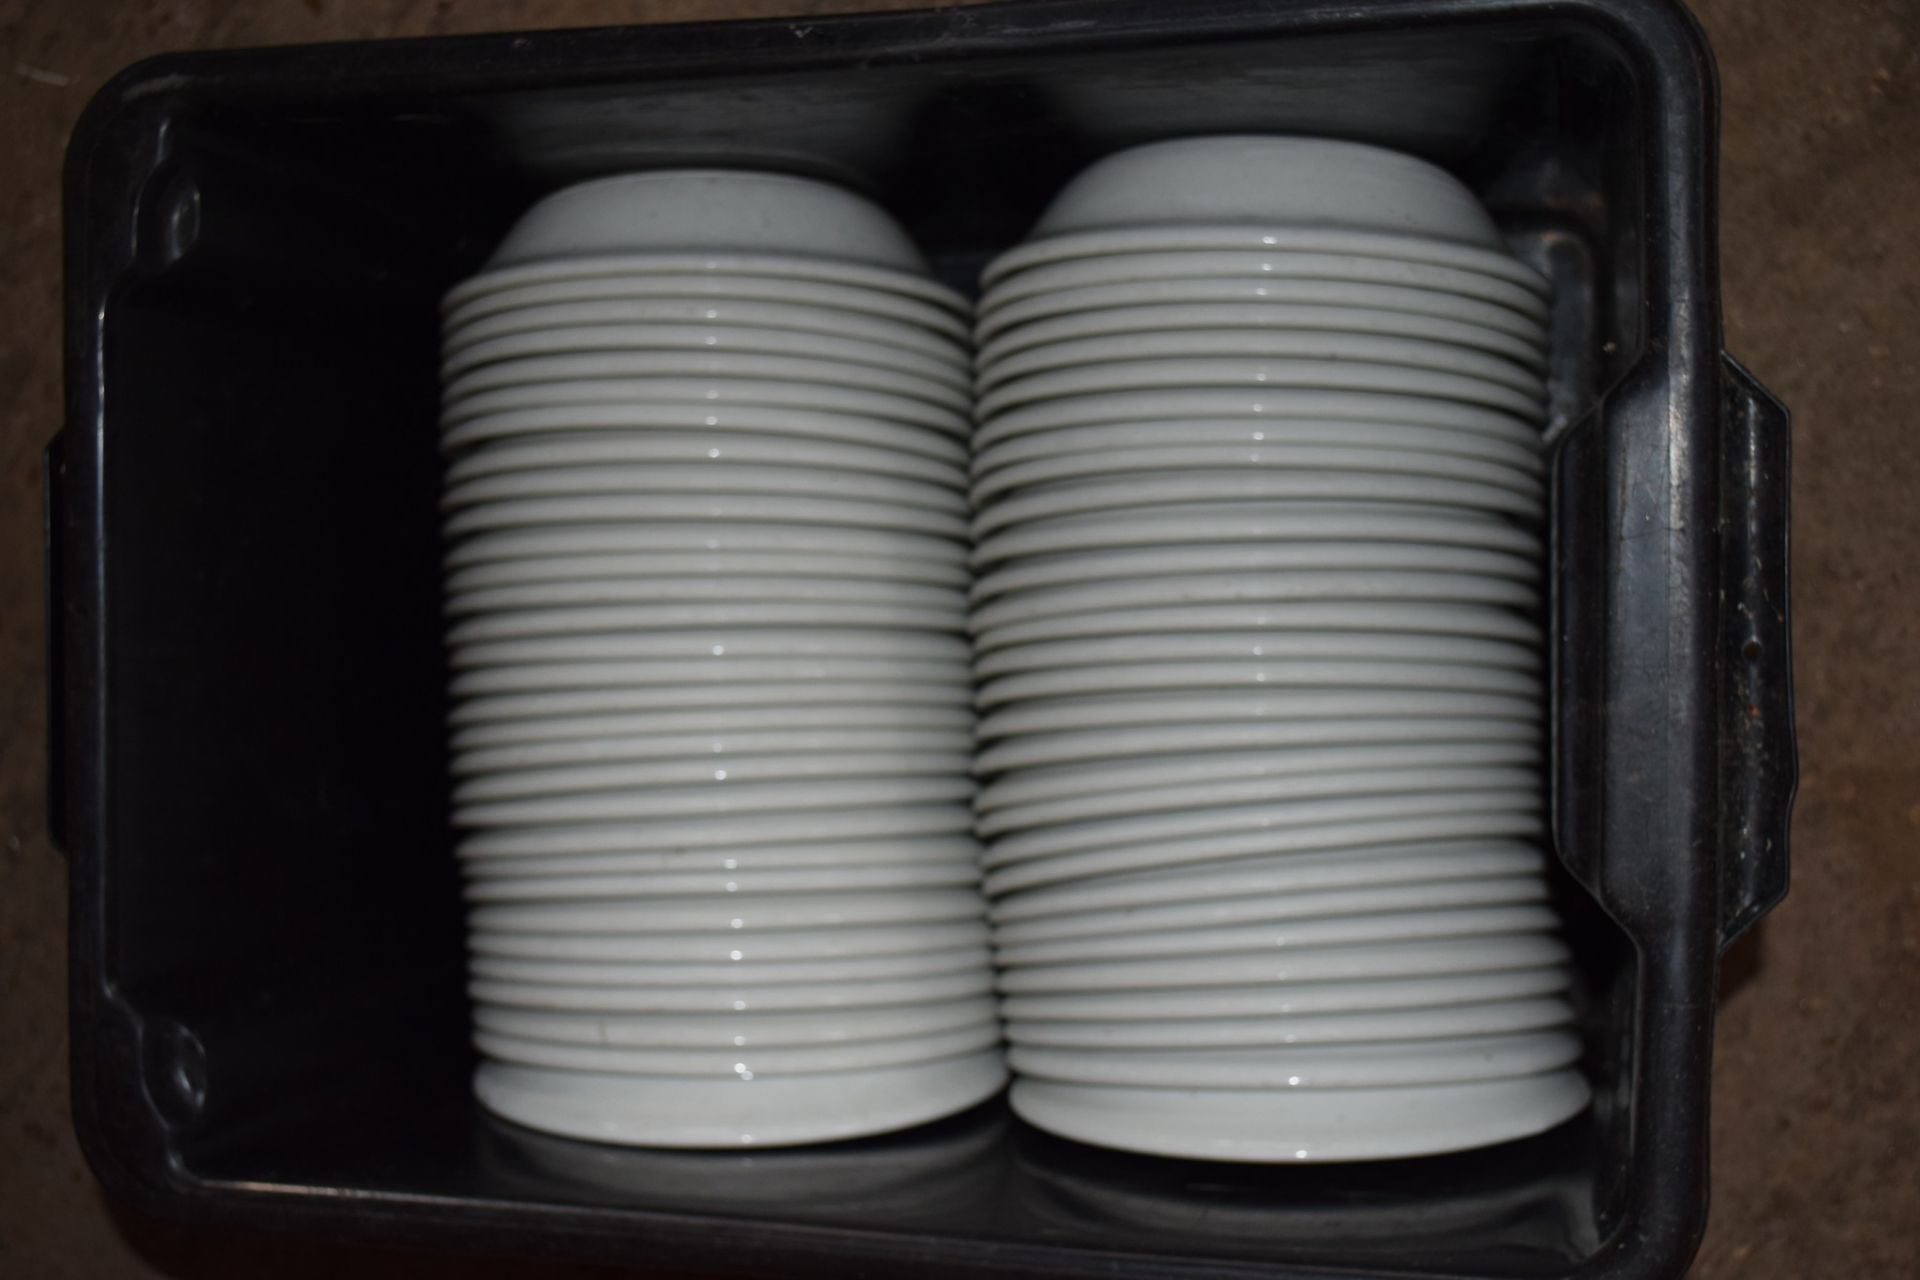 Crate: 61 large white Bowls.